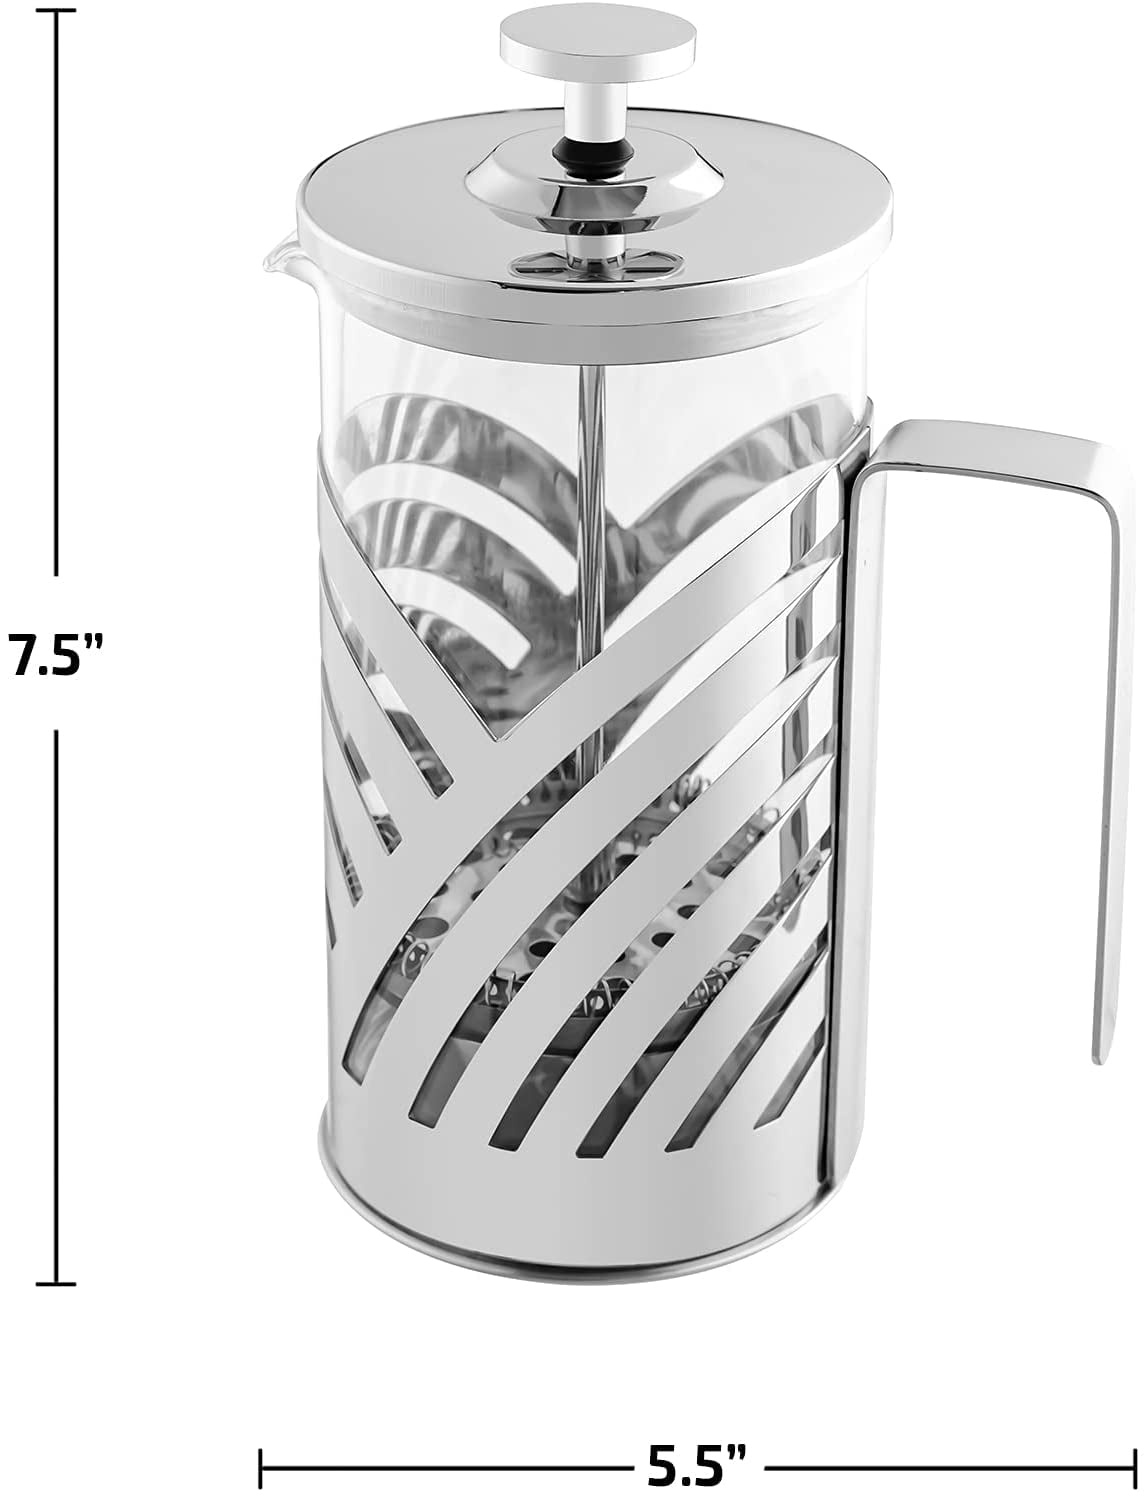 Ovente French Press Coffee and Tea Maker, Stainless Steel, Nickel Brushed,  34 oz, 8 cup, Horizontal (FSH34S)